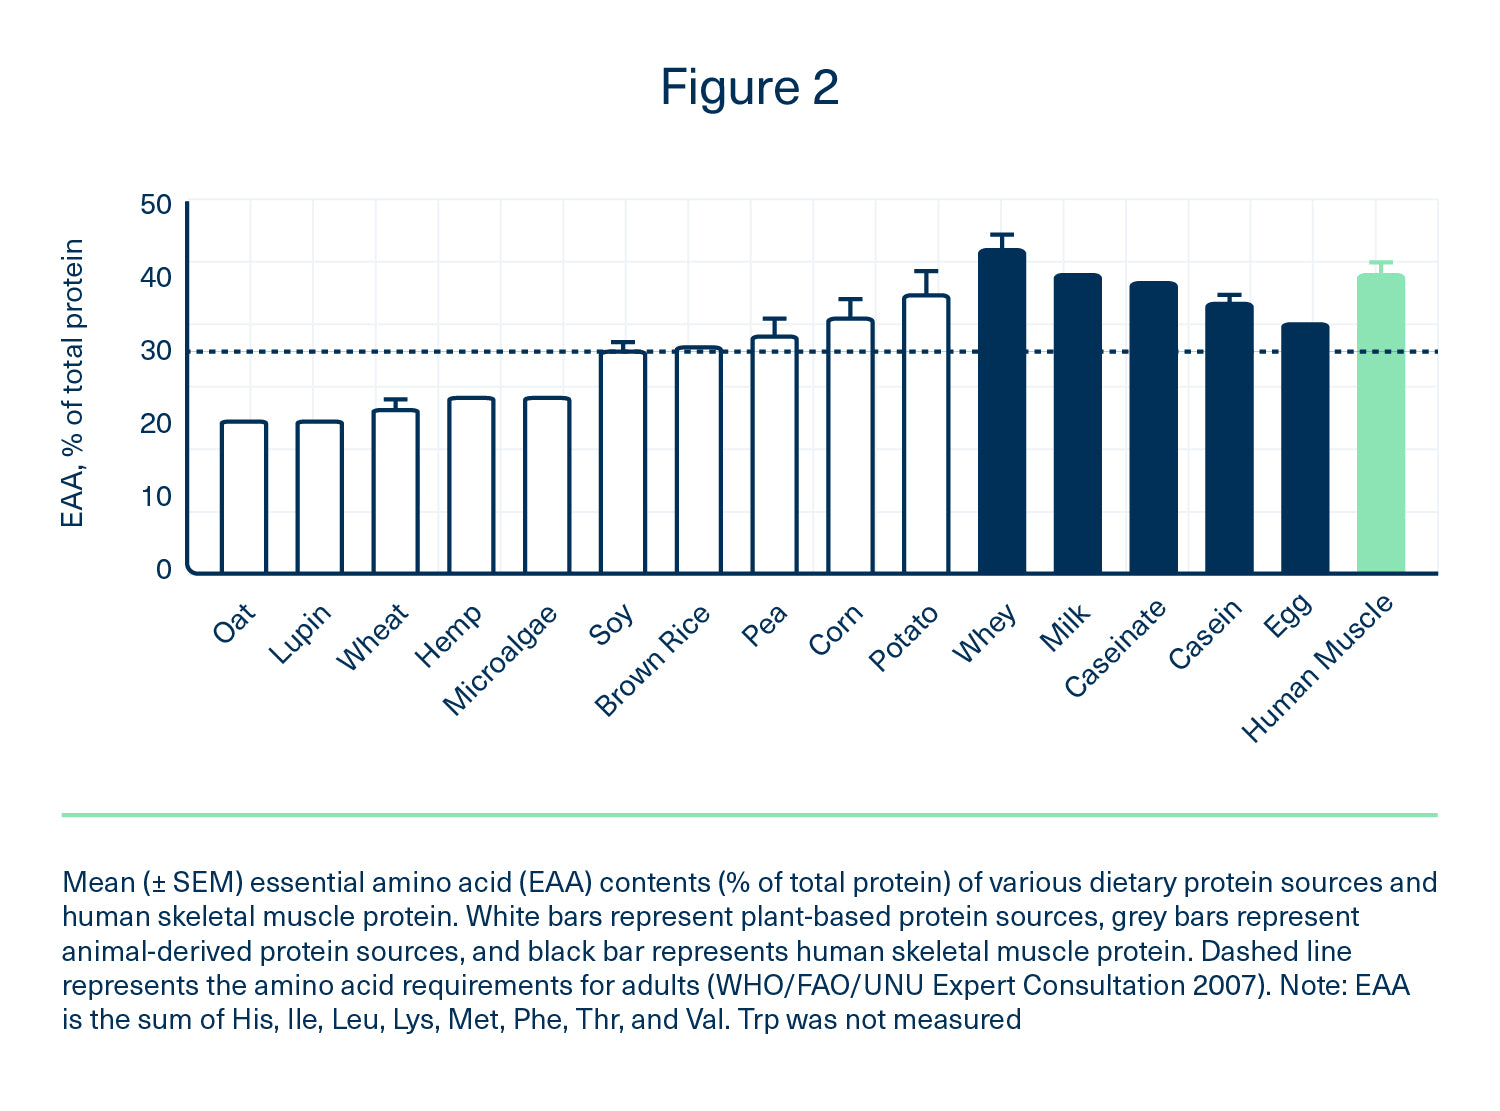 EAA content of dietary protein sources